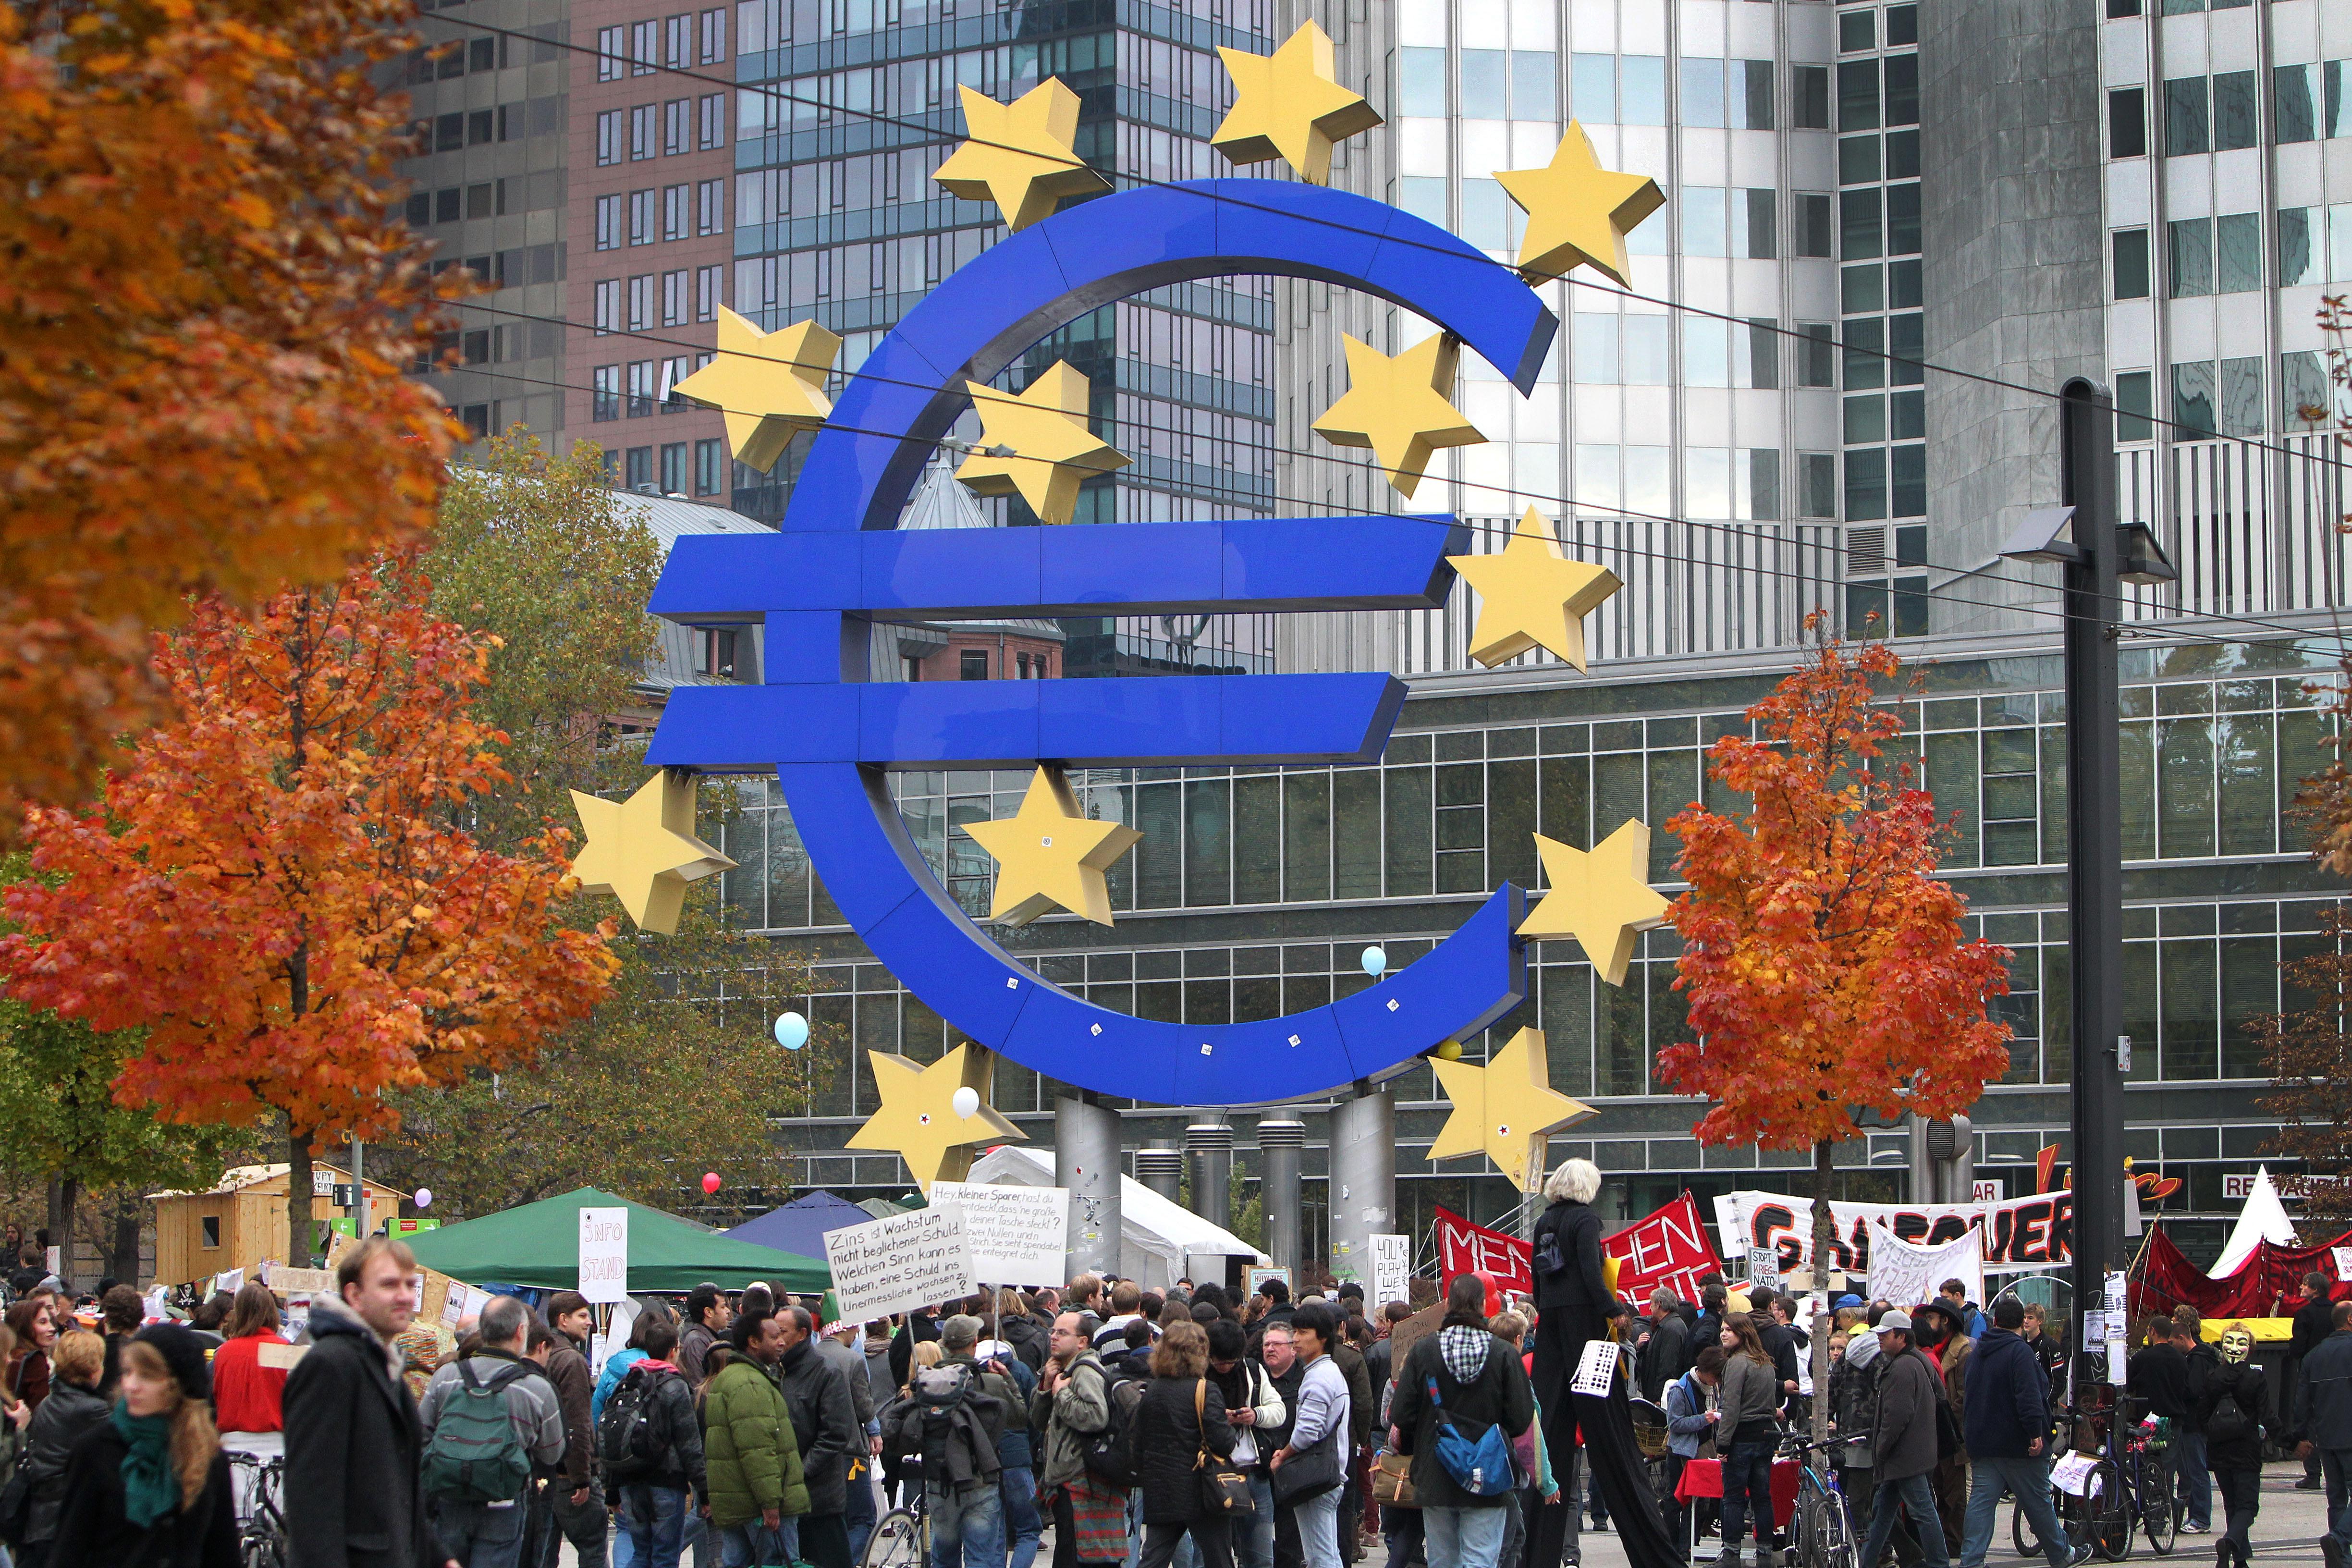 Demonstrators crowd around the euro logo in front of the European Central Bank (ECB) as they take part in a protest march as part of the 'Occupy Frankfurt' movement in Frankfurt am Main, on October 29, 2011